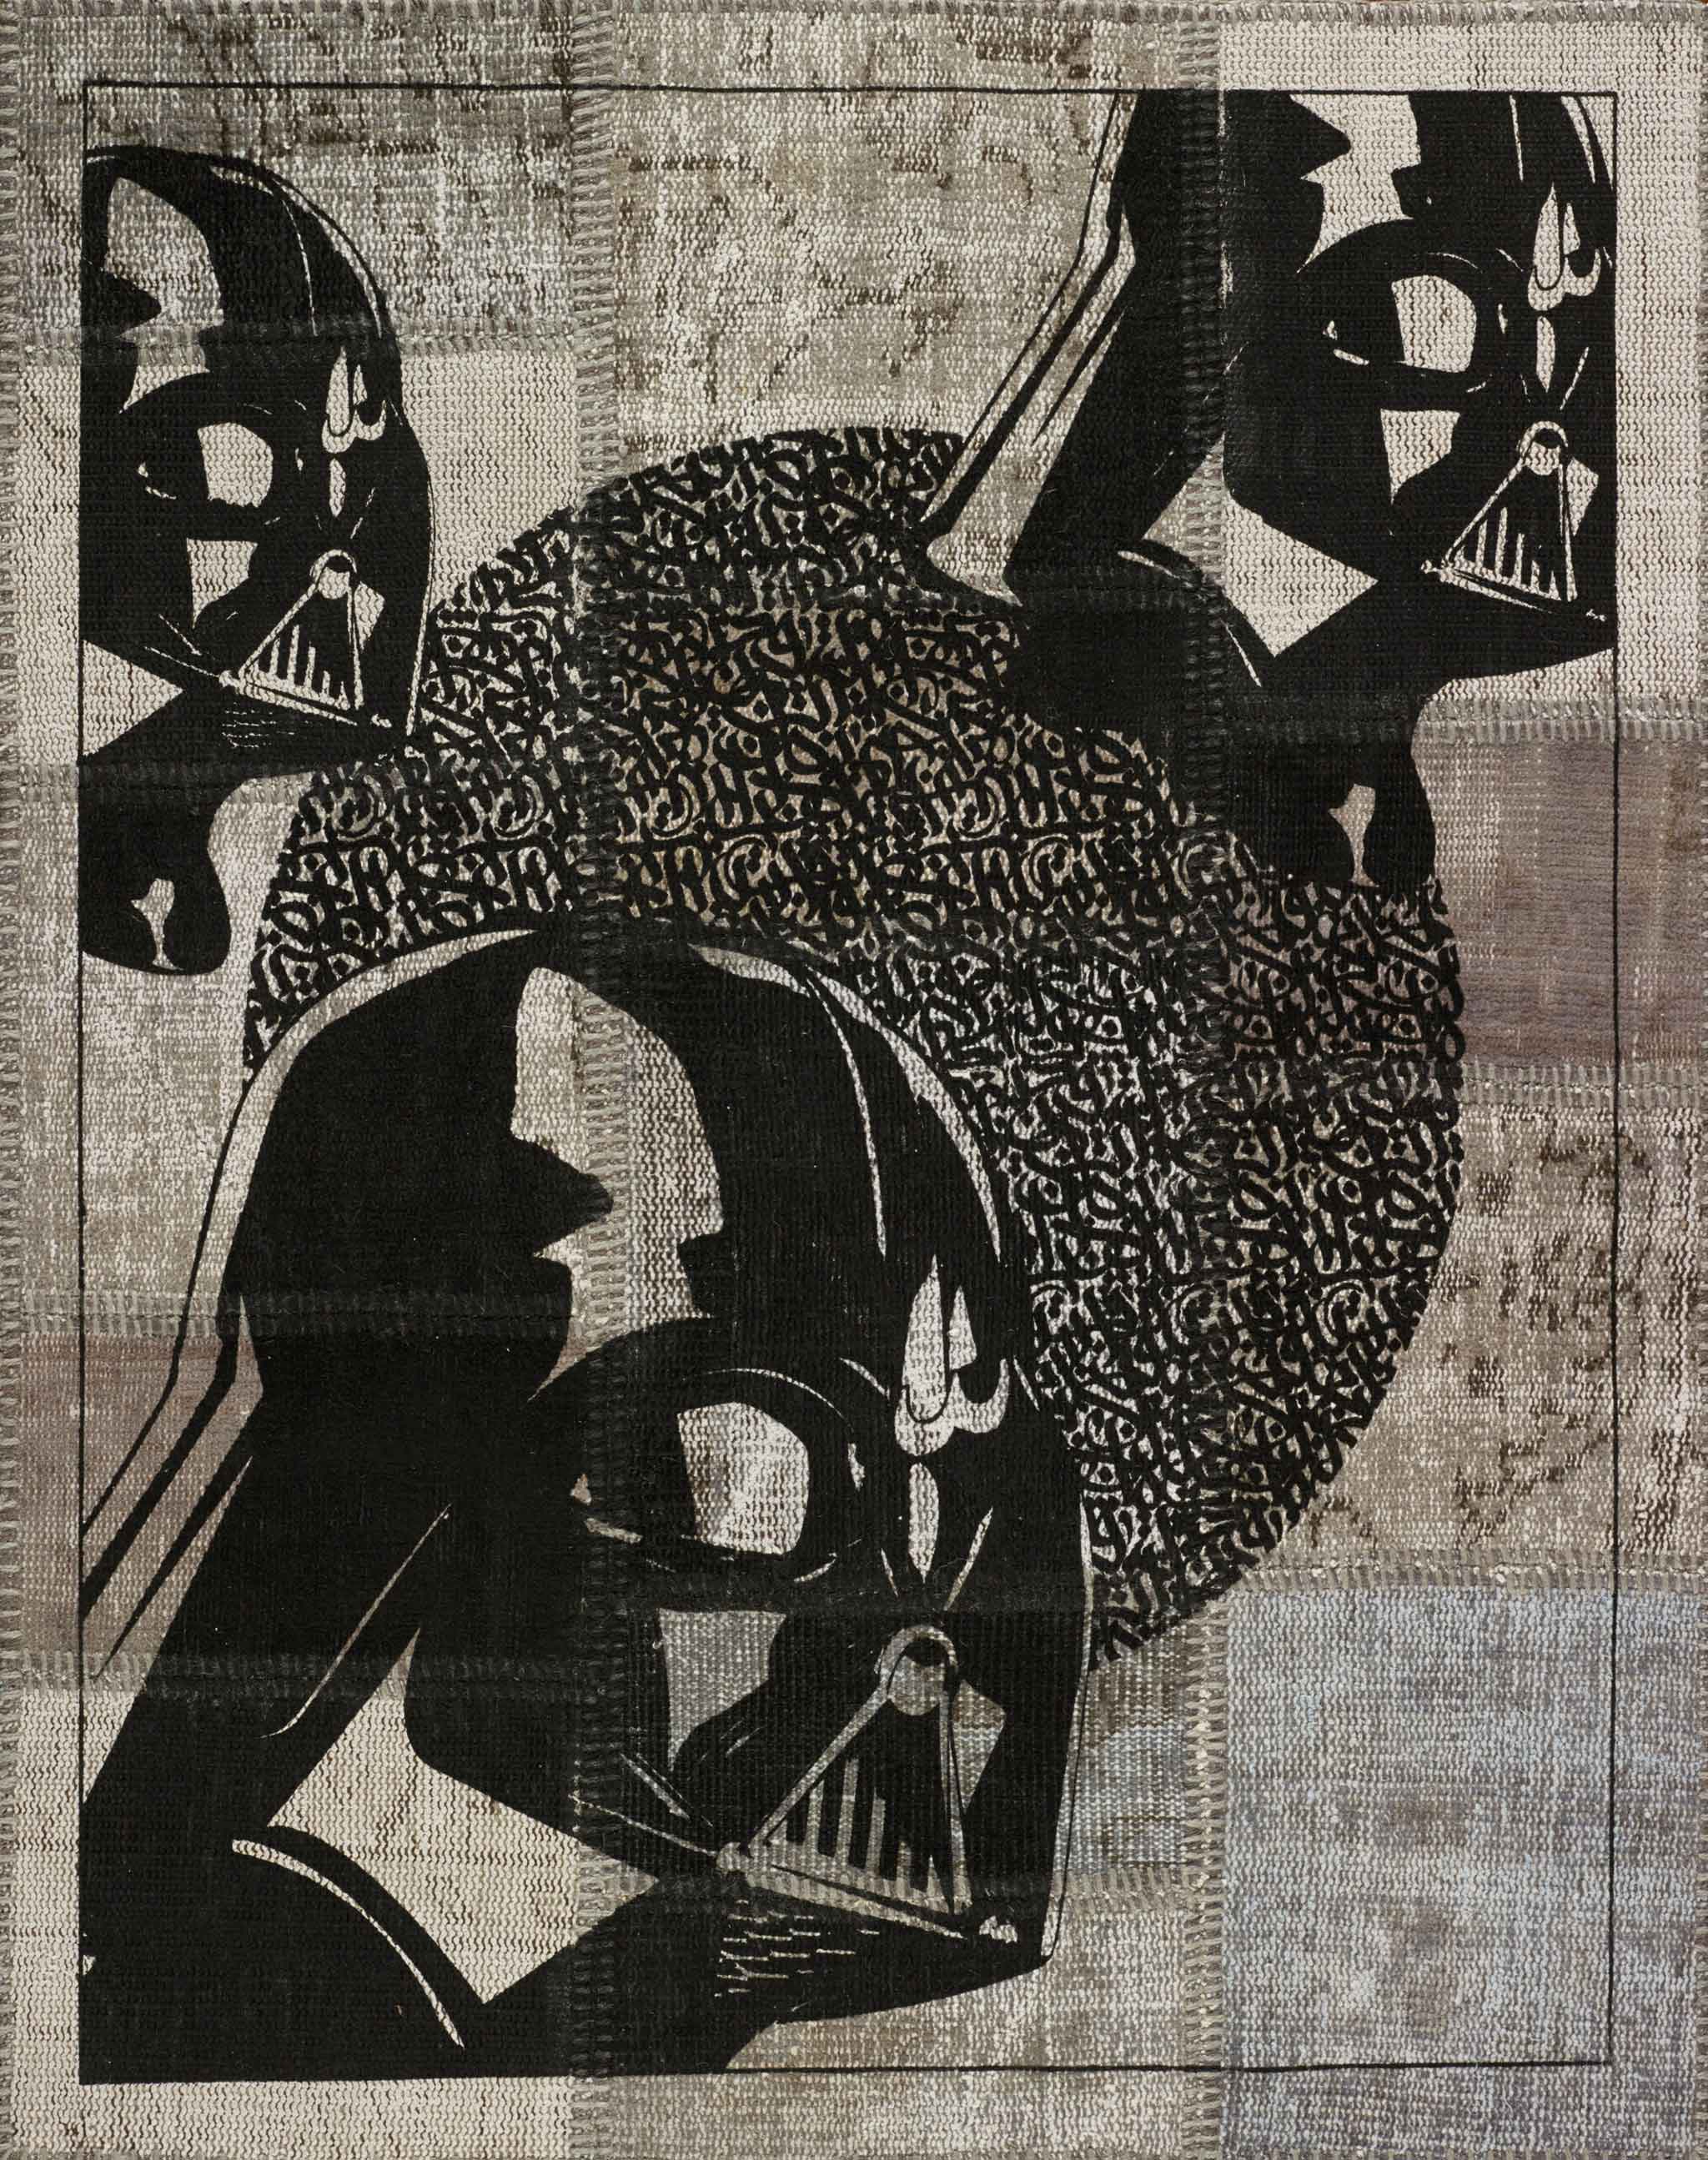 'Darth Vader' by Hadi Maktabi is a limited edition series of ten (10) 3ft x 4ft (1m x 1.2m) rugs eponymously named after the famed Star Wars character. | Image courtesy of Hadi Maktabi.